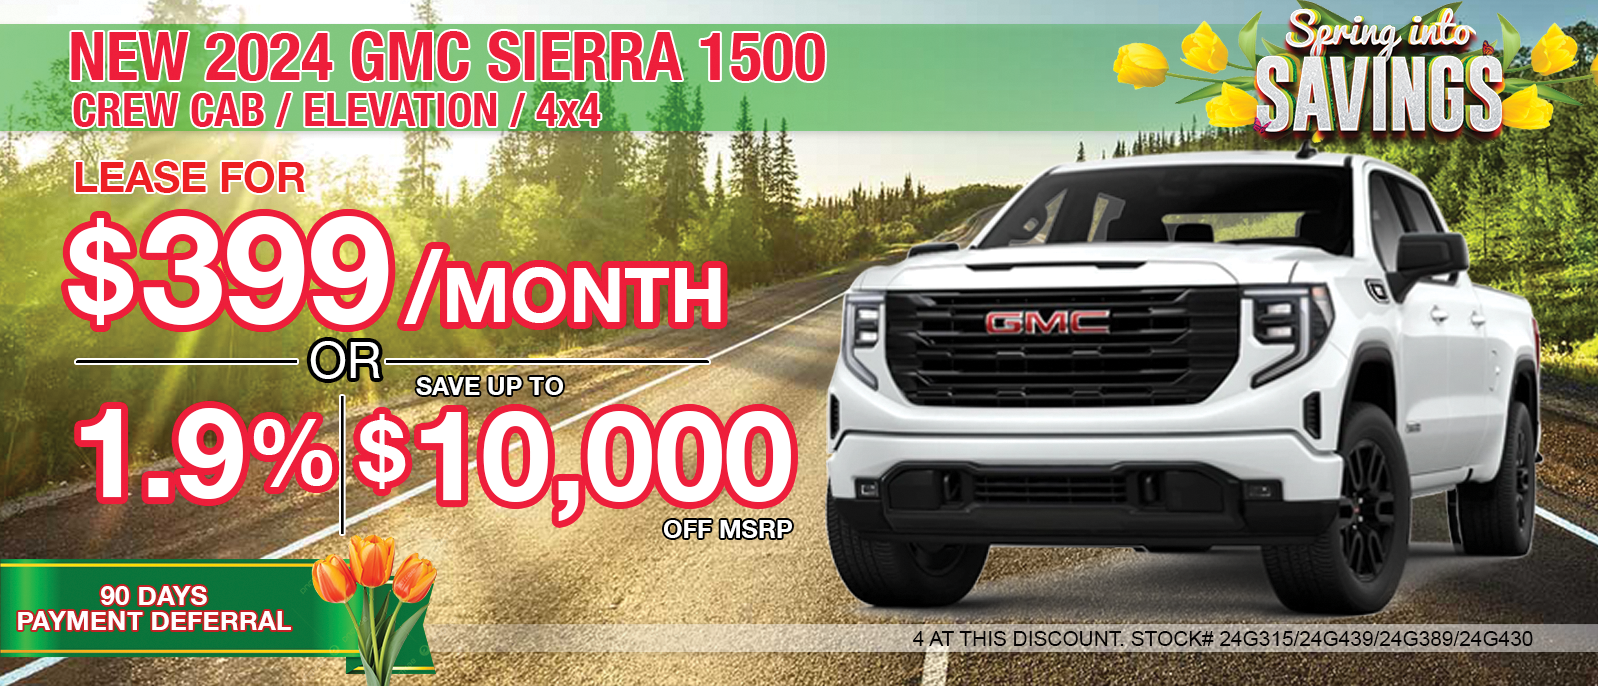 2024 GMC SIERRA 1500 CREW CAB SLT /  ELEVATION. Your Net Savings After All Offers save up to $10,000.